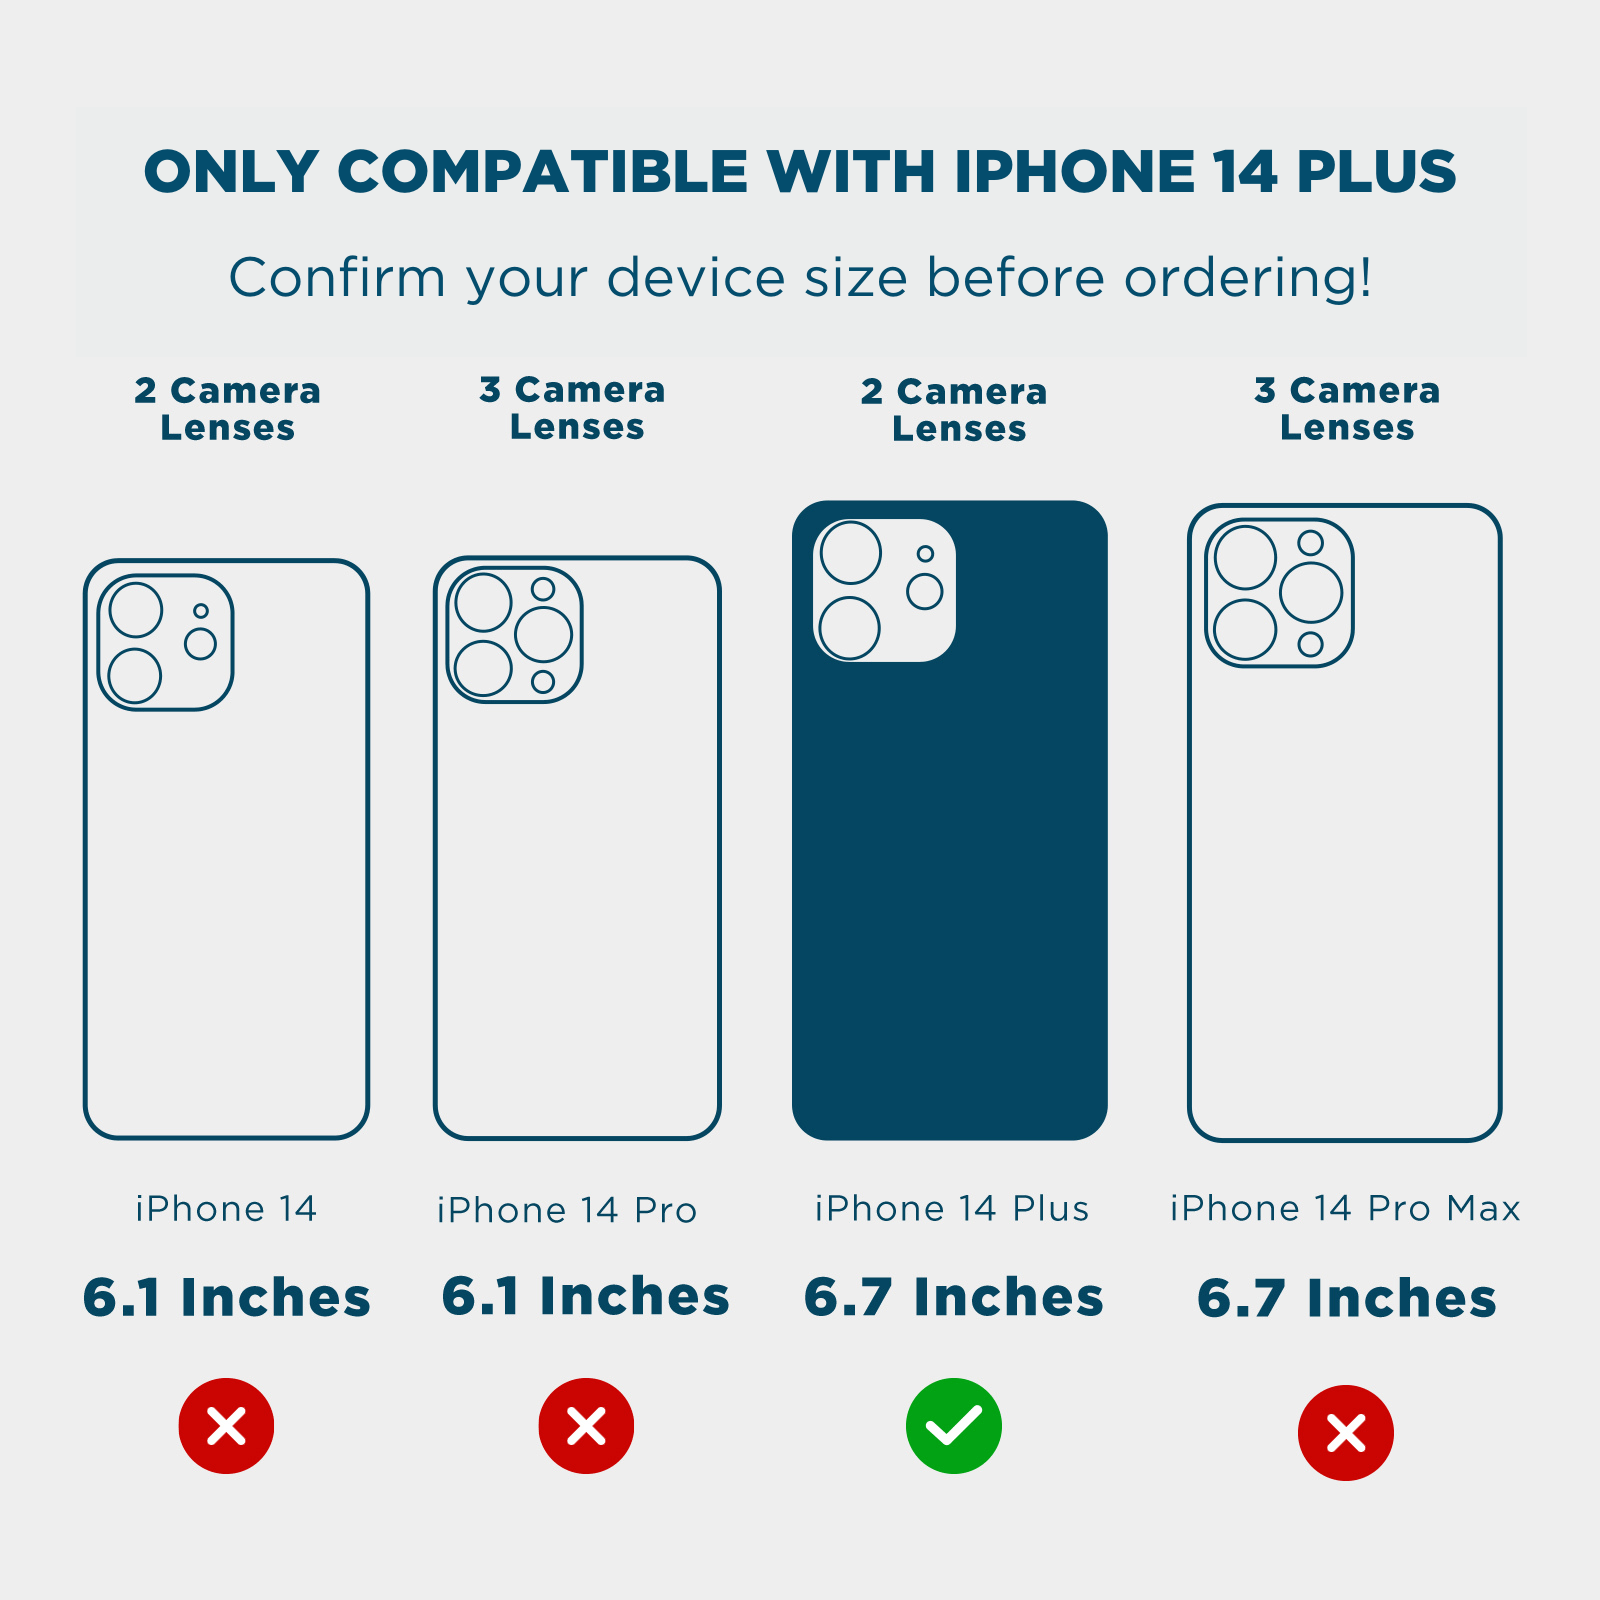 ONLY COMPATIBLE WITH IPHONE 14 PLUS. CONFIRM YOUR DEVICE SIZE BEFORE ORDERING! 2 CAMERA LENSES, 3 CAMERA LENSES, 2 CAMERA LENSES, 3 CAMERA LENSES, 6.1 INCHEC, 6.1 INCHES, 6.7 INCHES, 6.7 INCHES. COLOR::TWINKLE DIAMOND